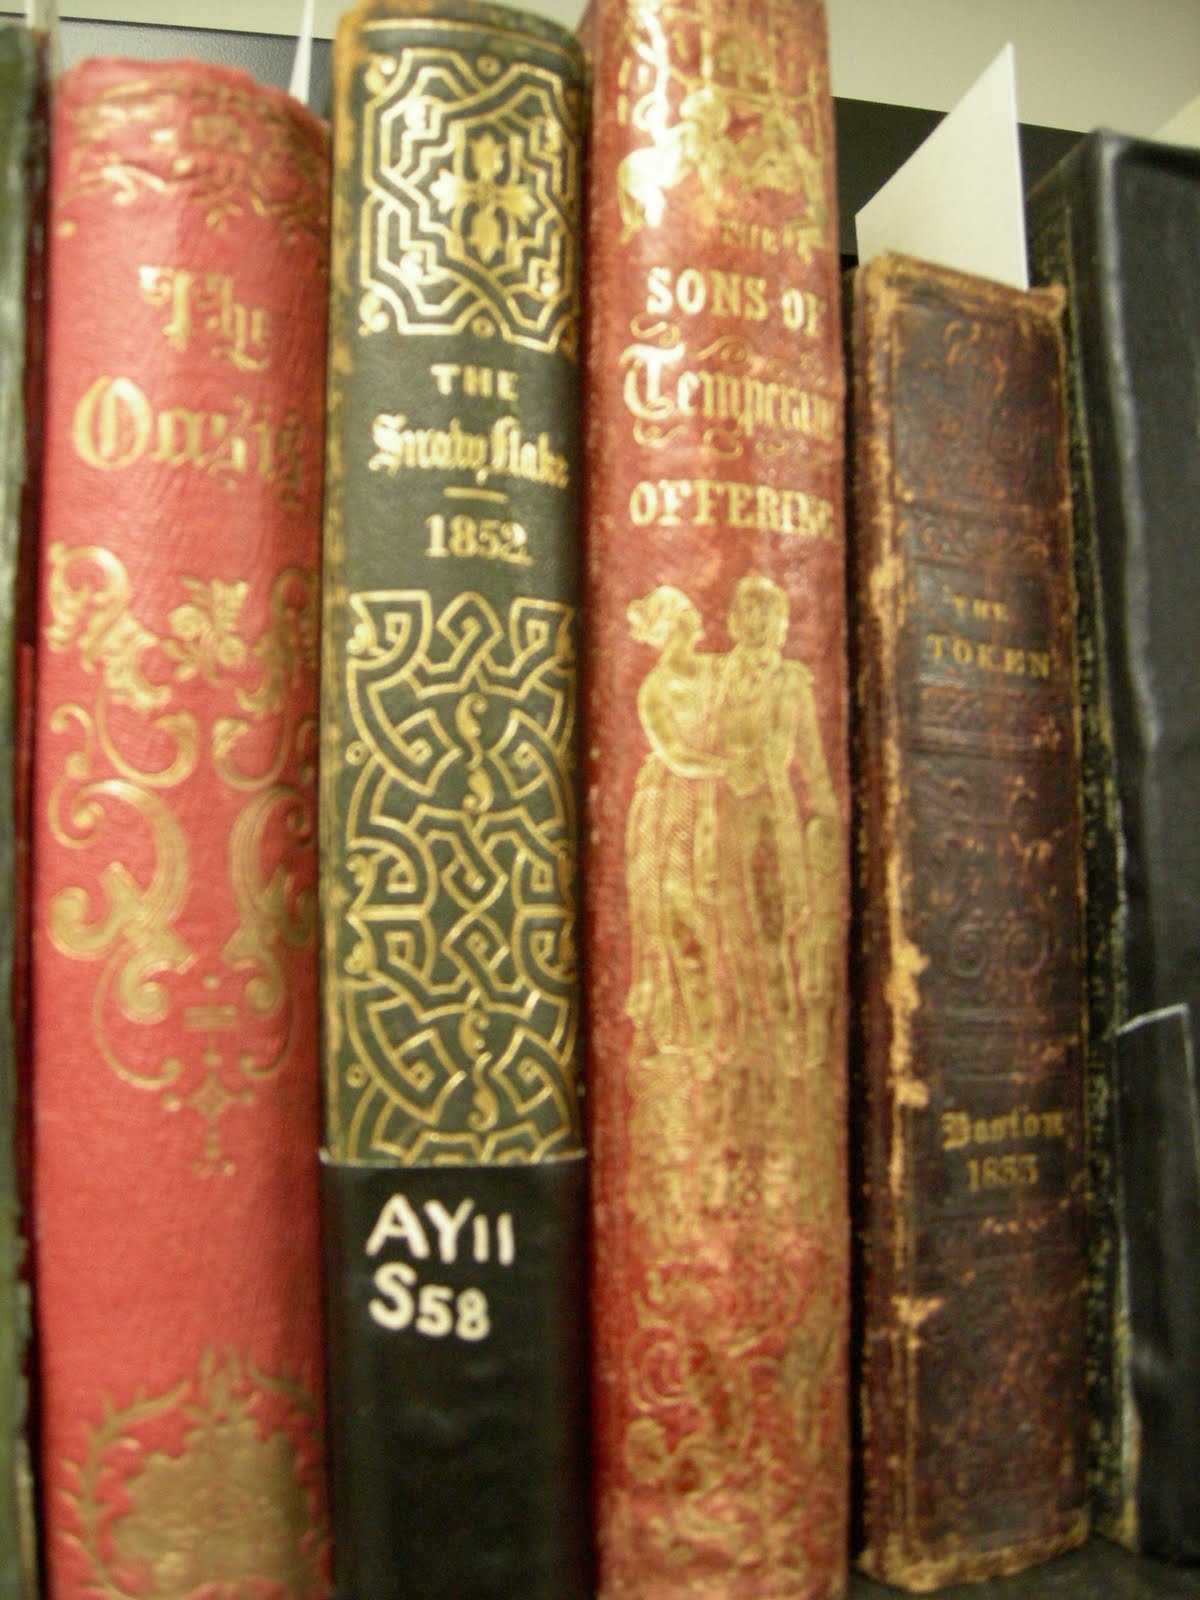 Spines of rare books gifted to the Brandeis collection